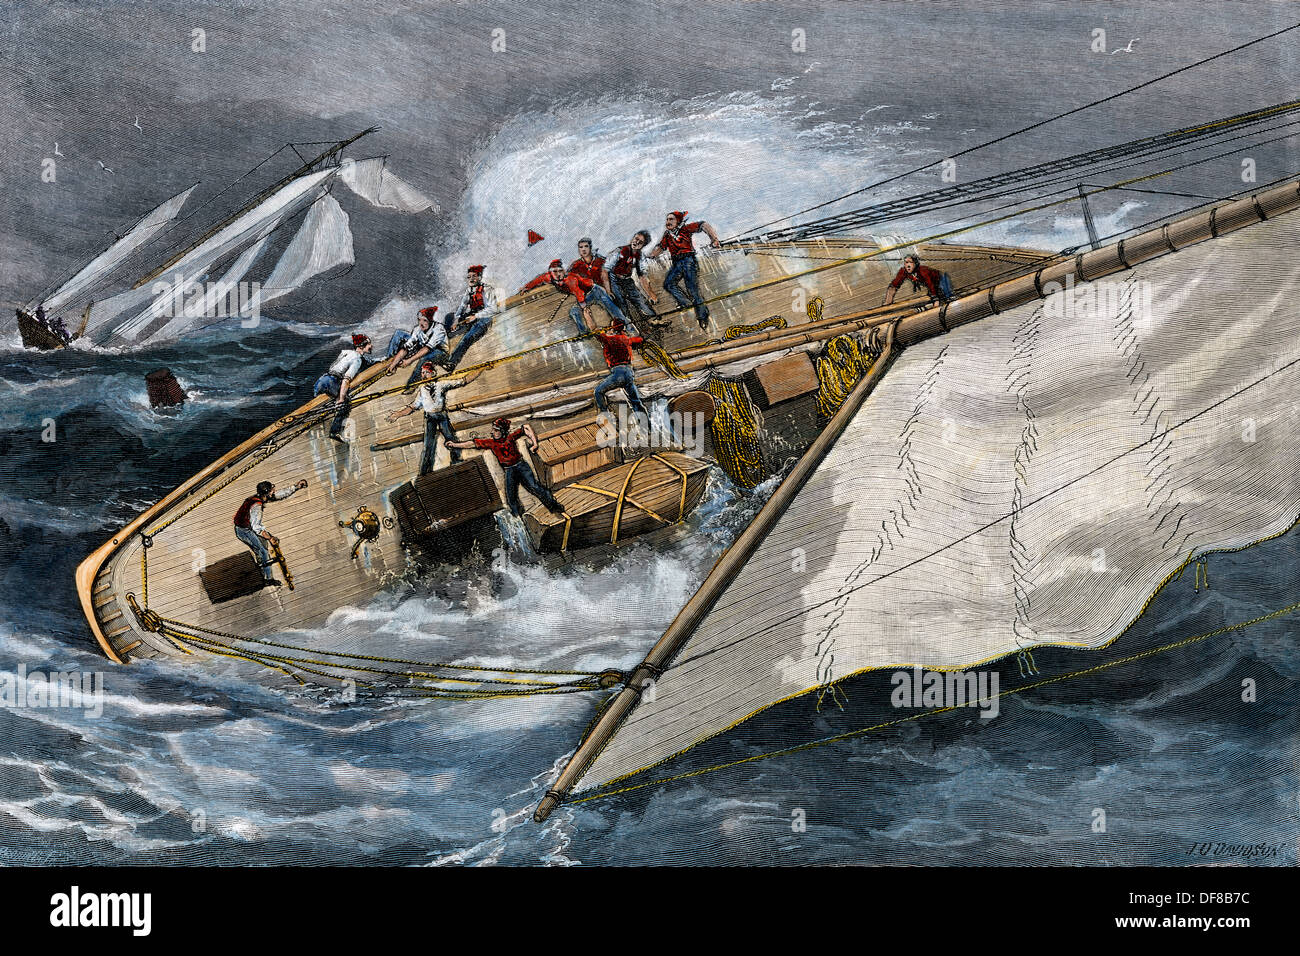 Corinthian yacht crew endangered by misunderstanding orders, 1880s. Hand-colored woodcut Stock Photo